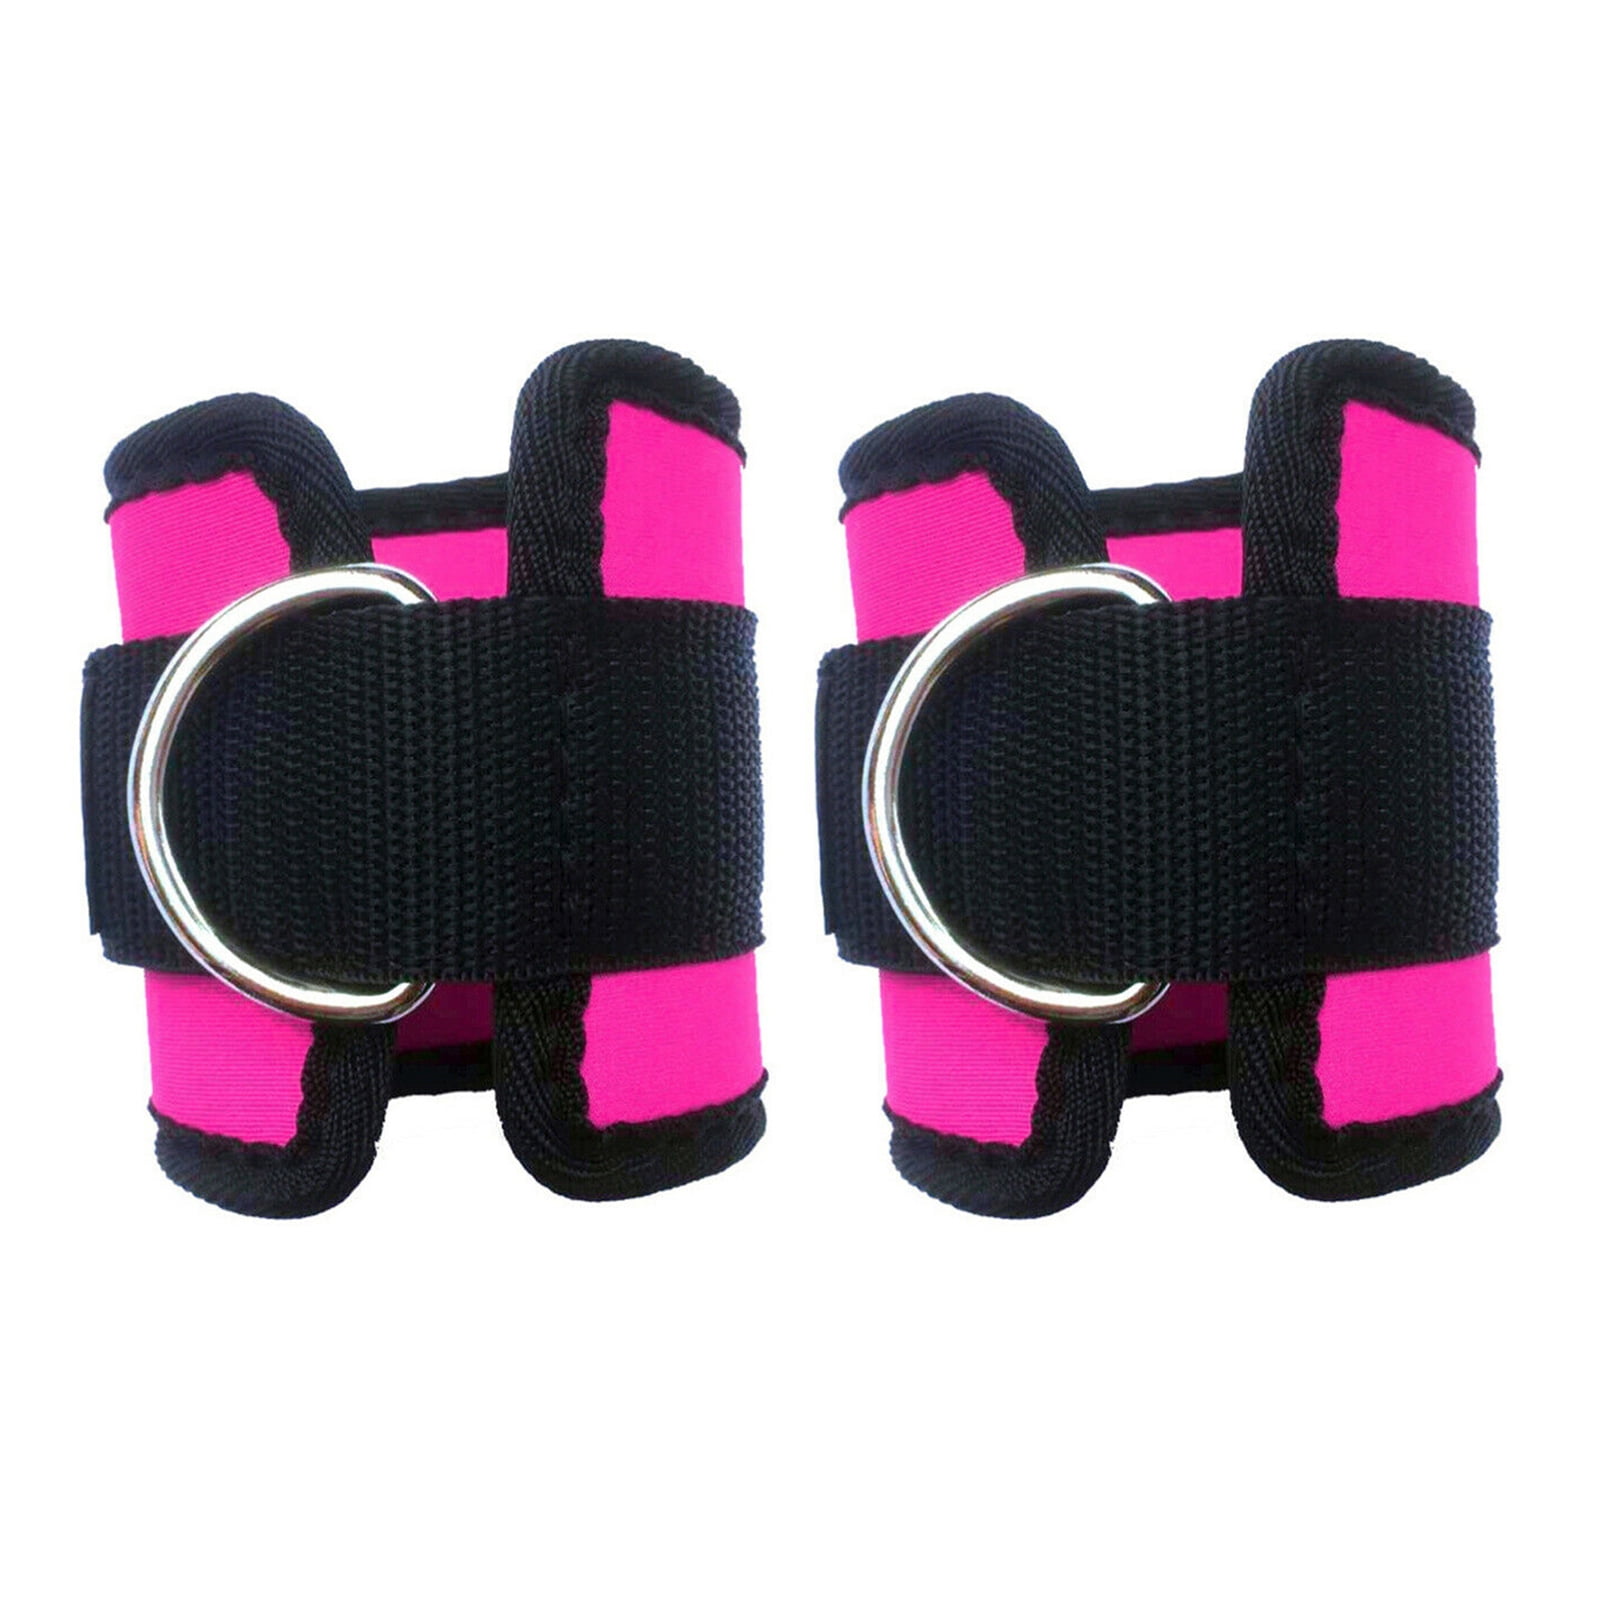 2PCS Wrist Weights Stylish Adjustable Training Ankle Weights Leg Weights 